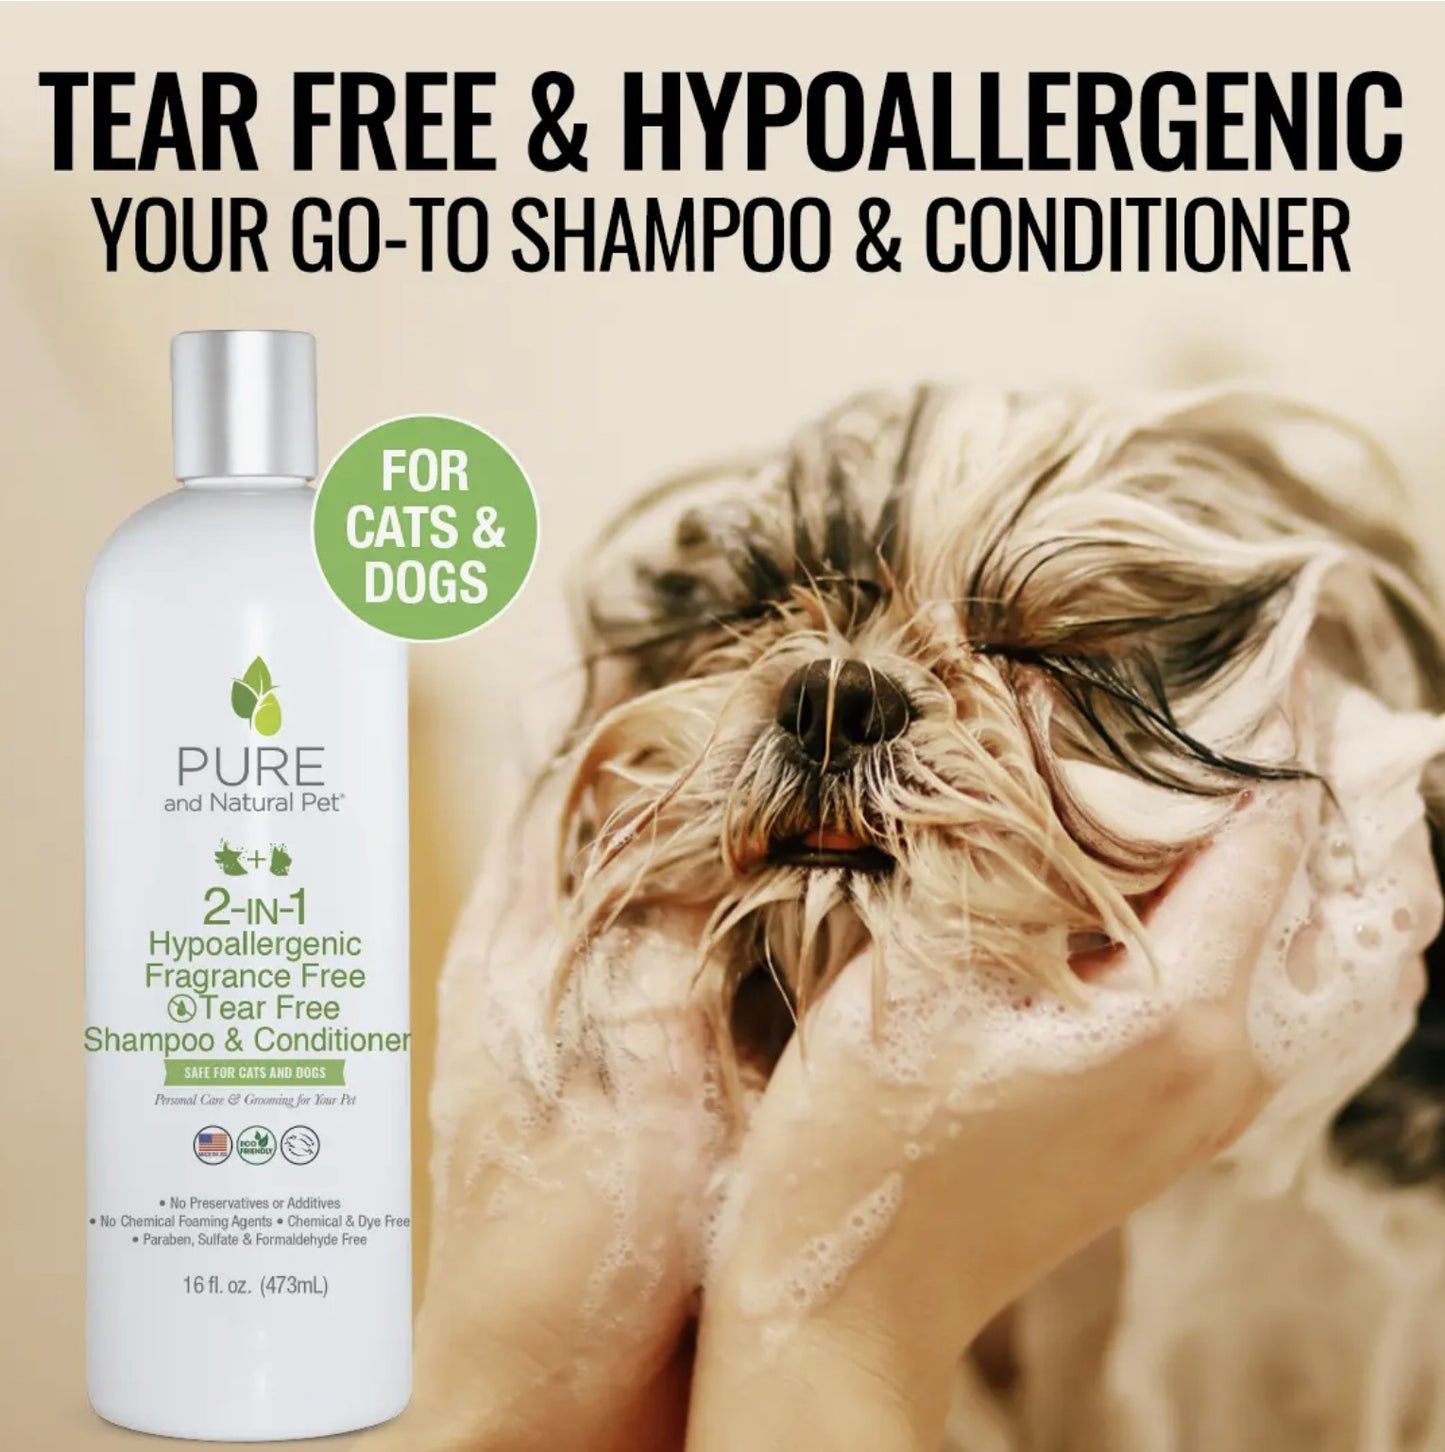 Pure and Natural Pet 2-IN-1 Hypoallergenic Shampoo & Conditioner